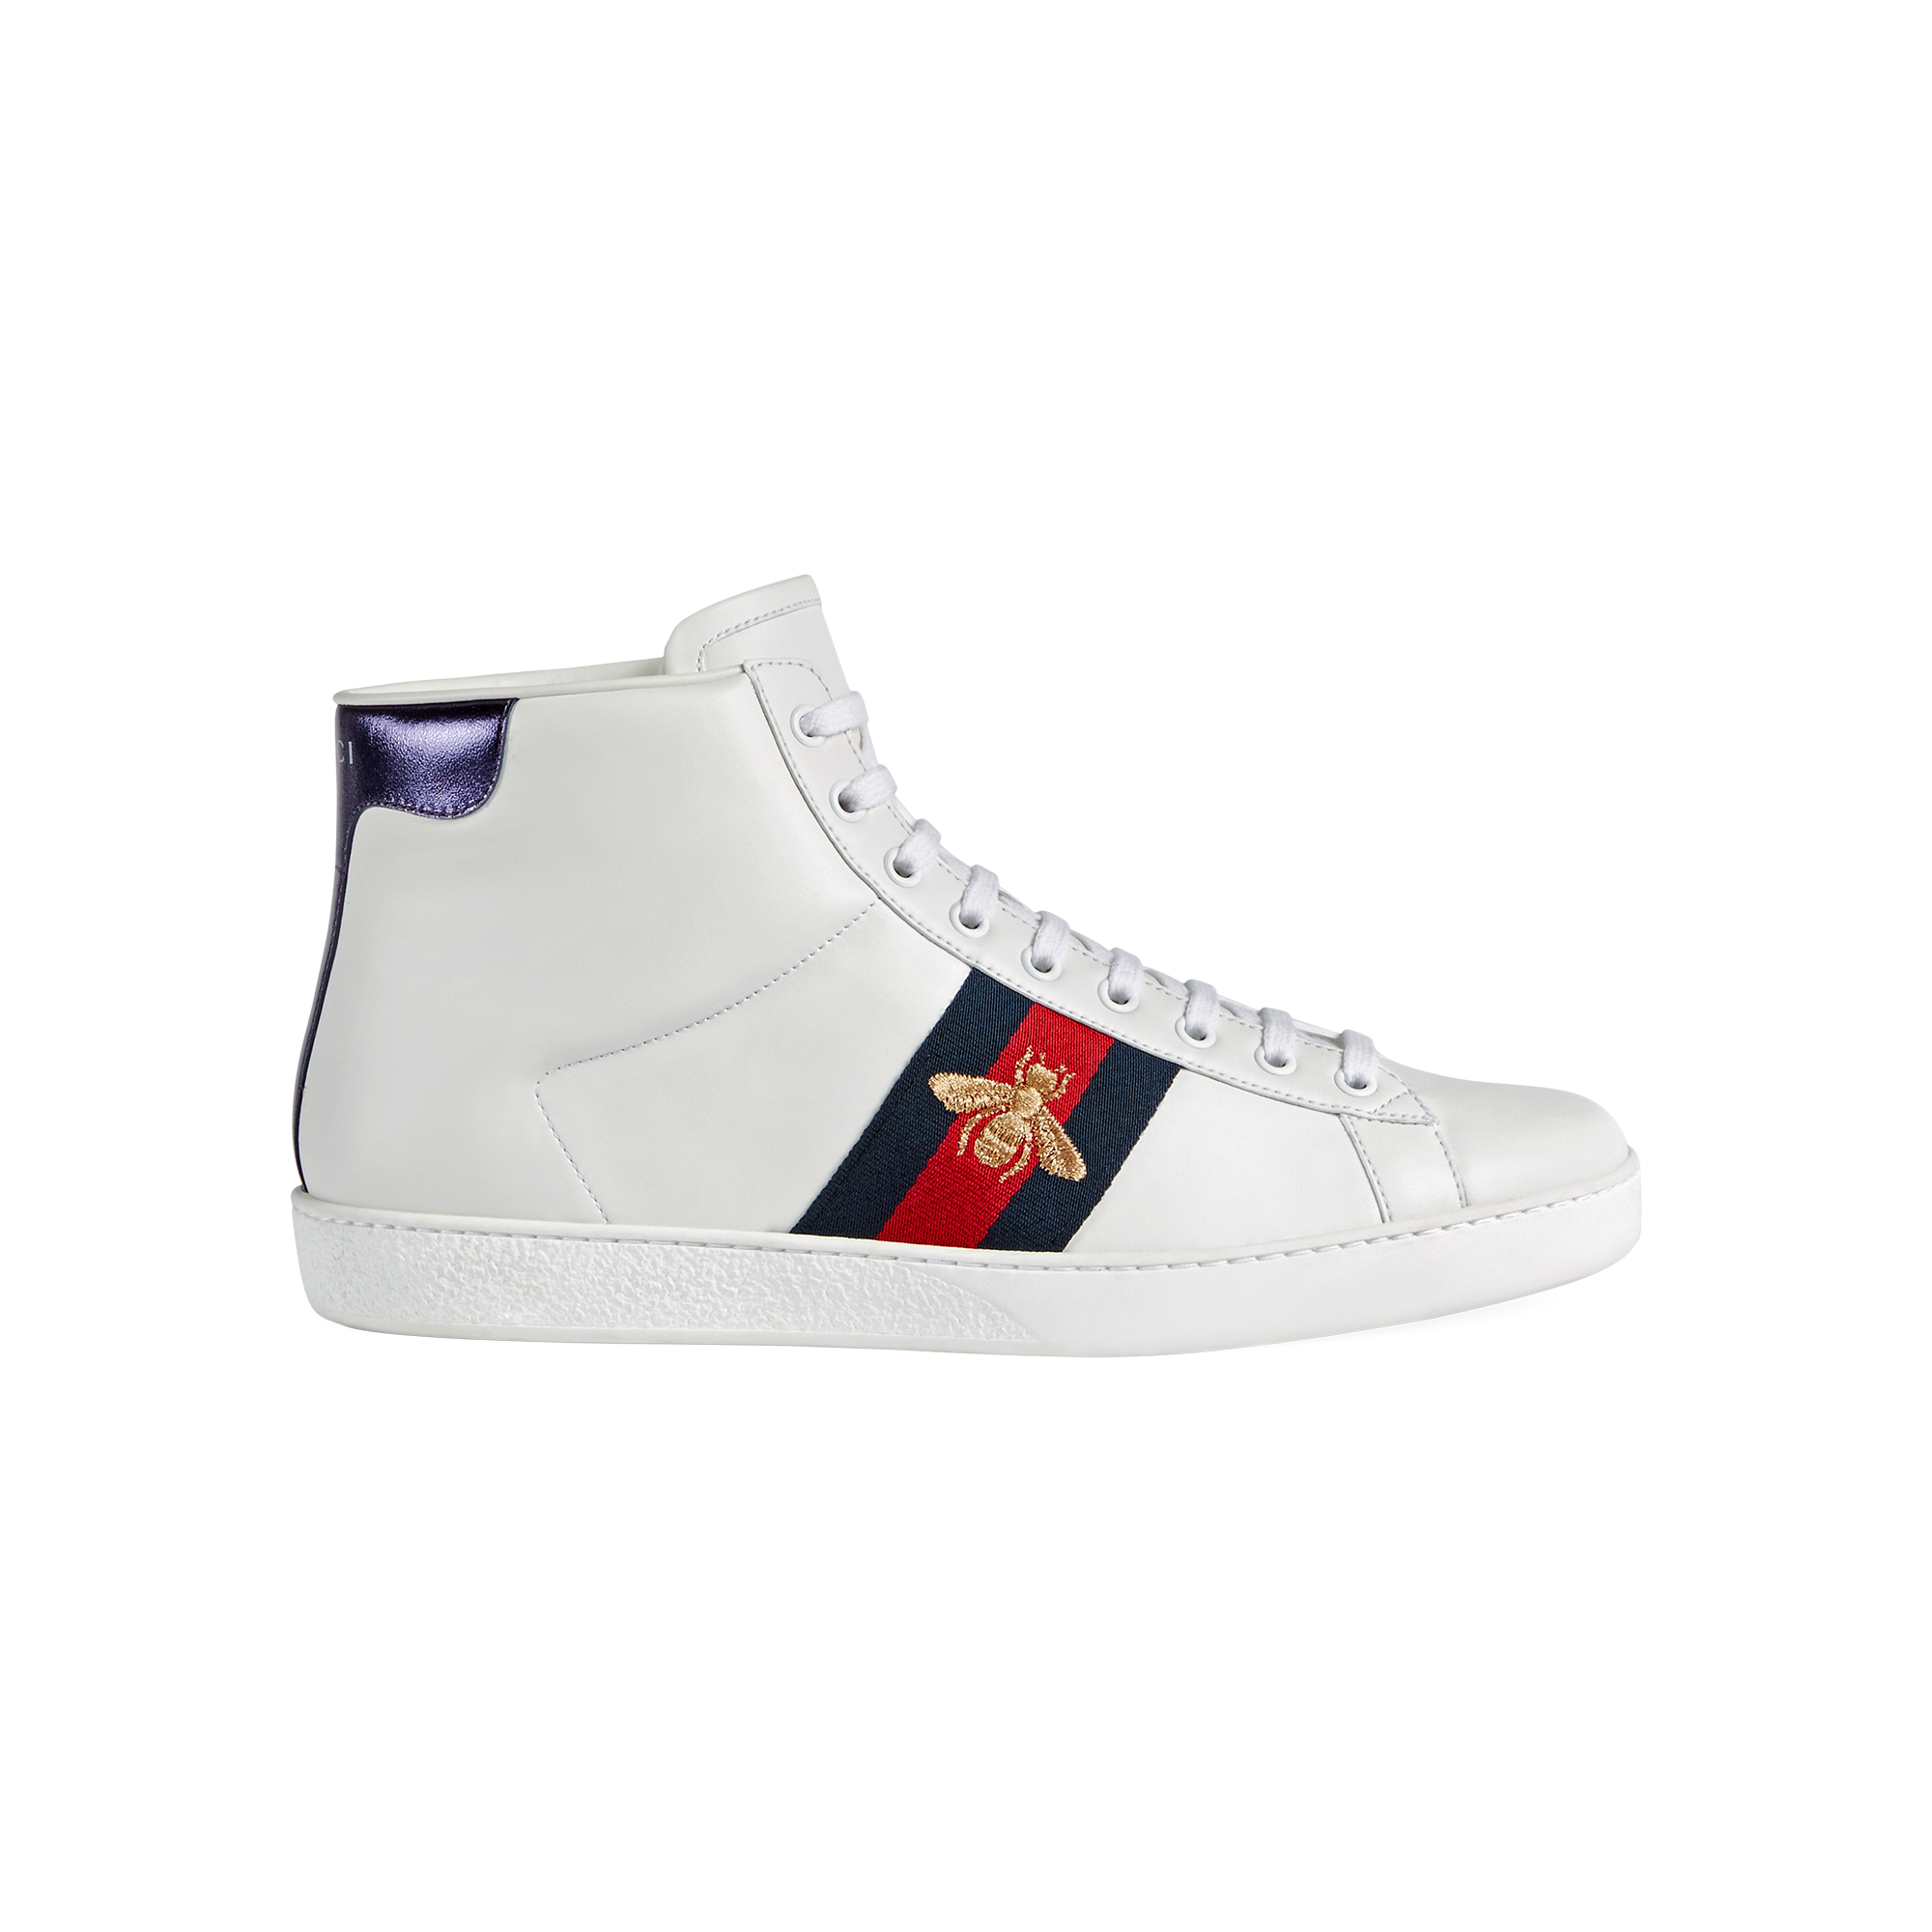 Gucci Ace high-top sneaker